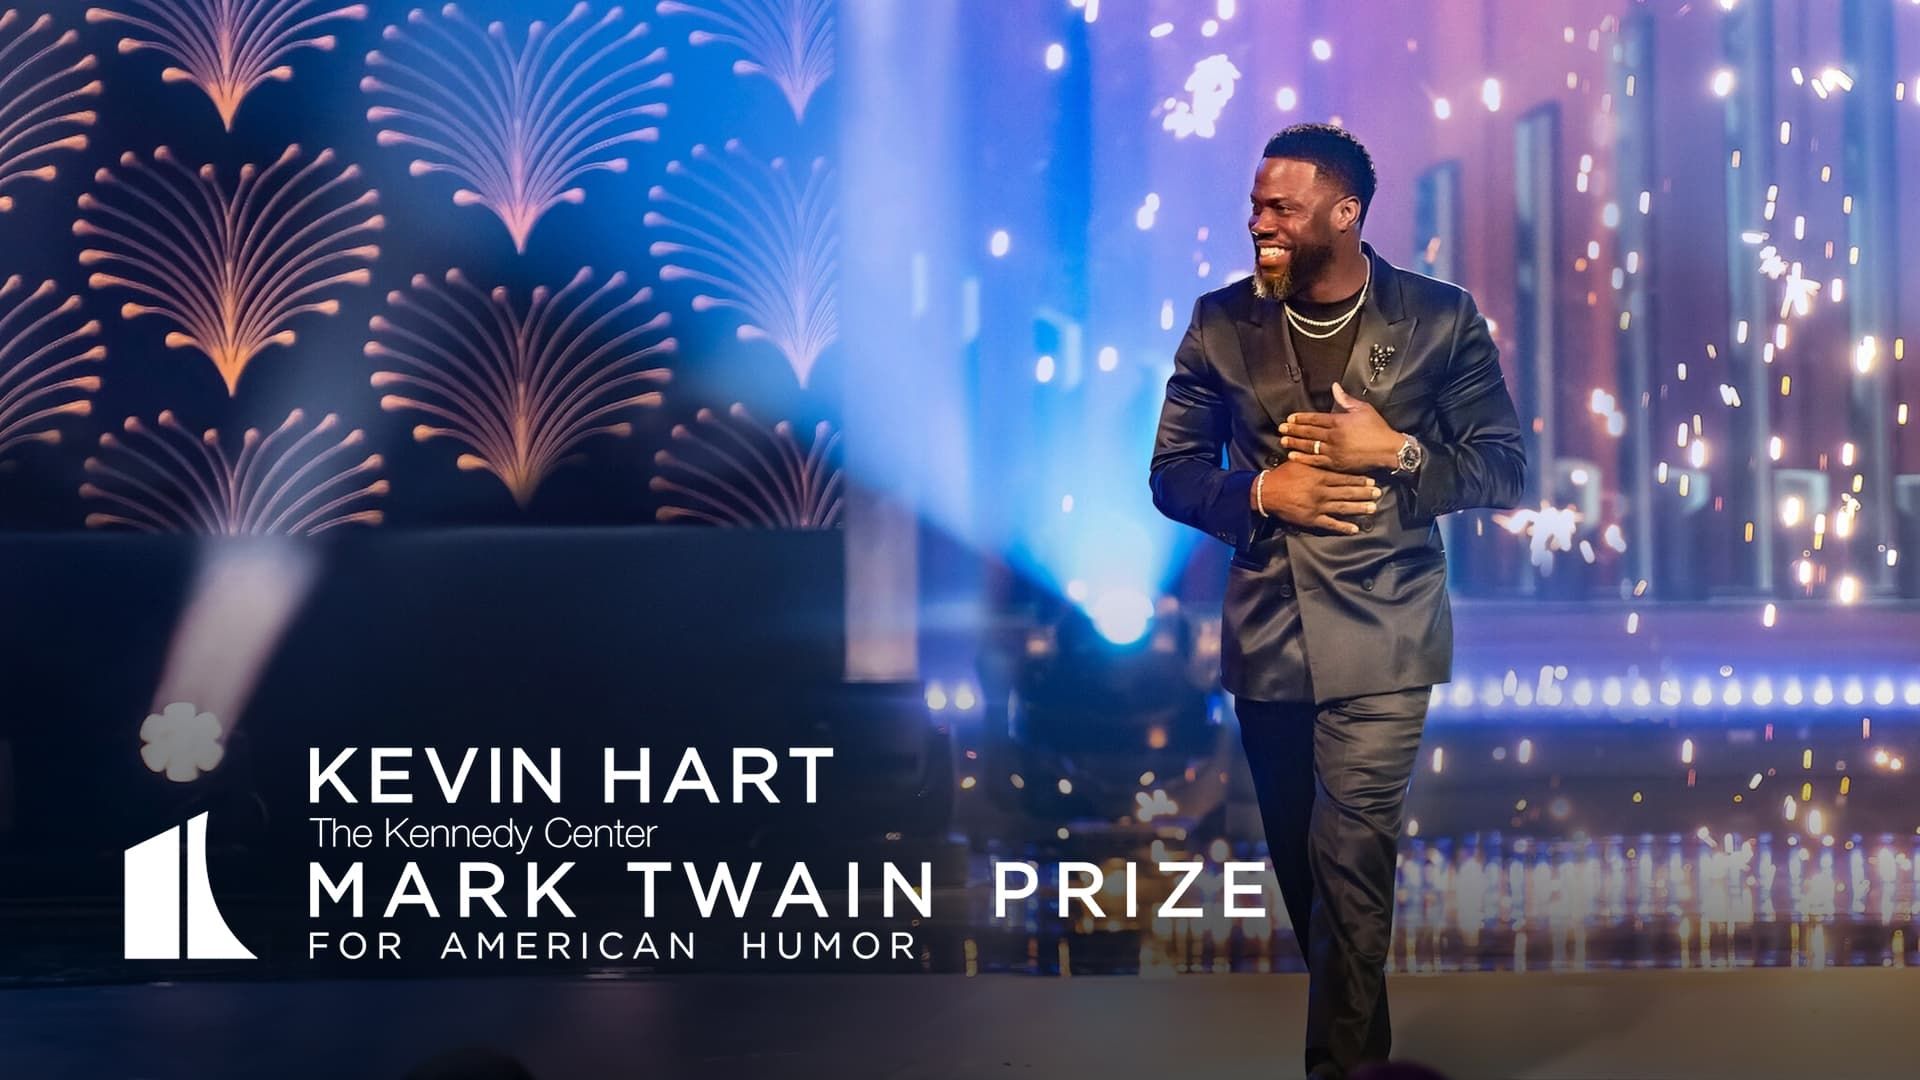 Cubierta de Kevin Hart: The Kennedy Center Mark Twain Prize for American Humor